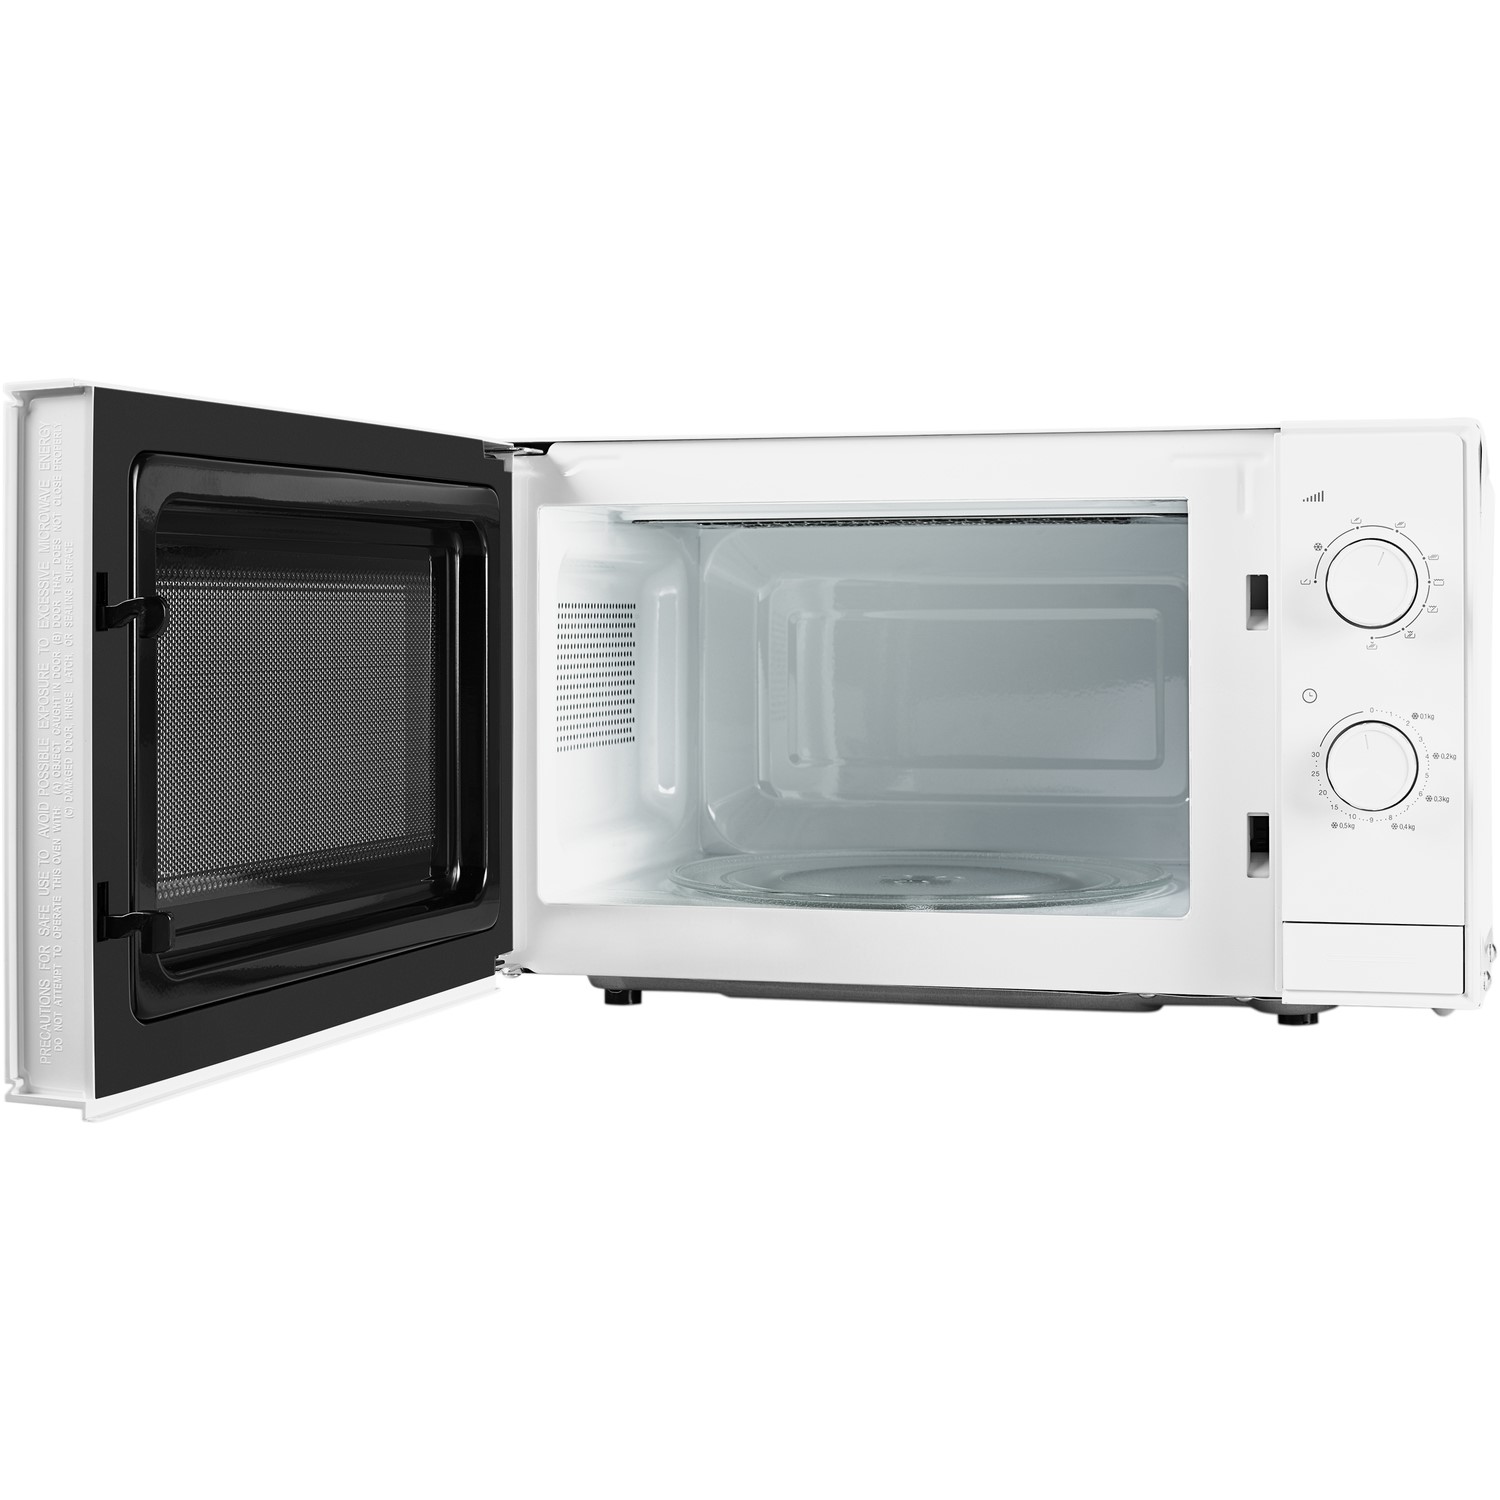 Beko MGC20100w 700W 20L Microwave Oven With Grill - white MGC20100w